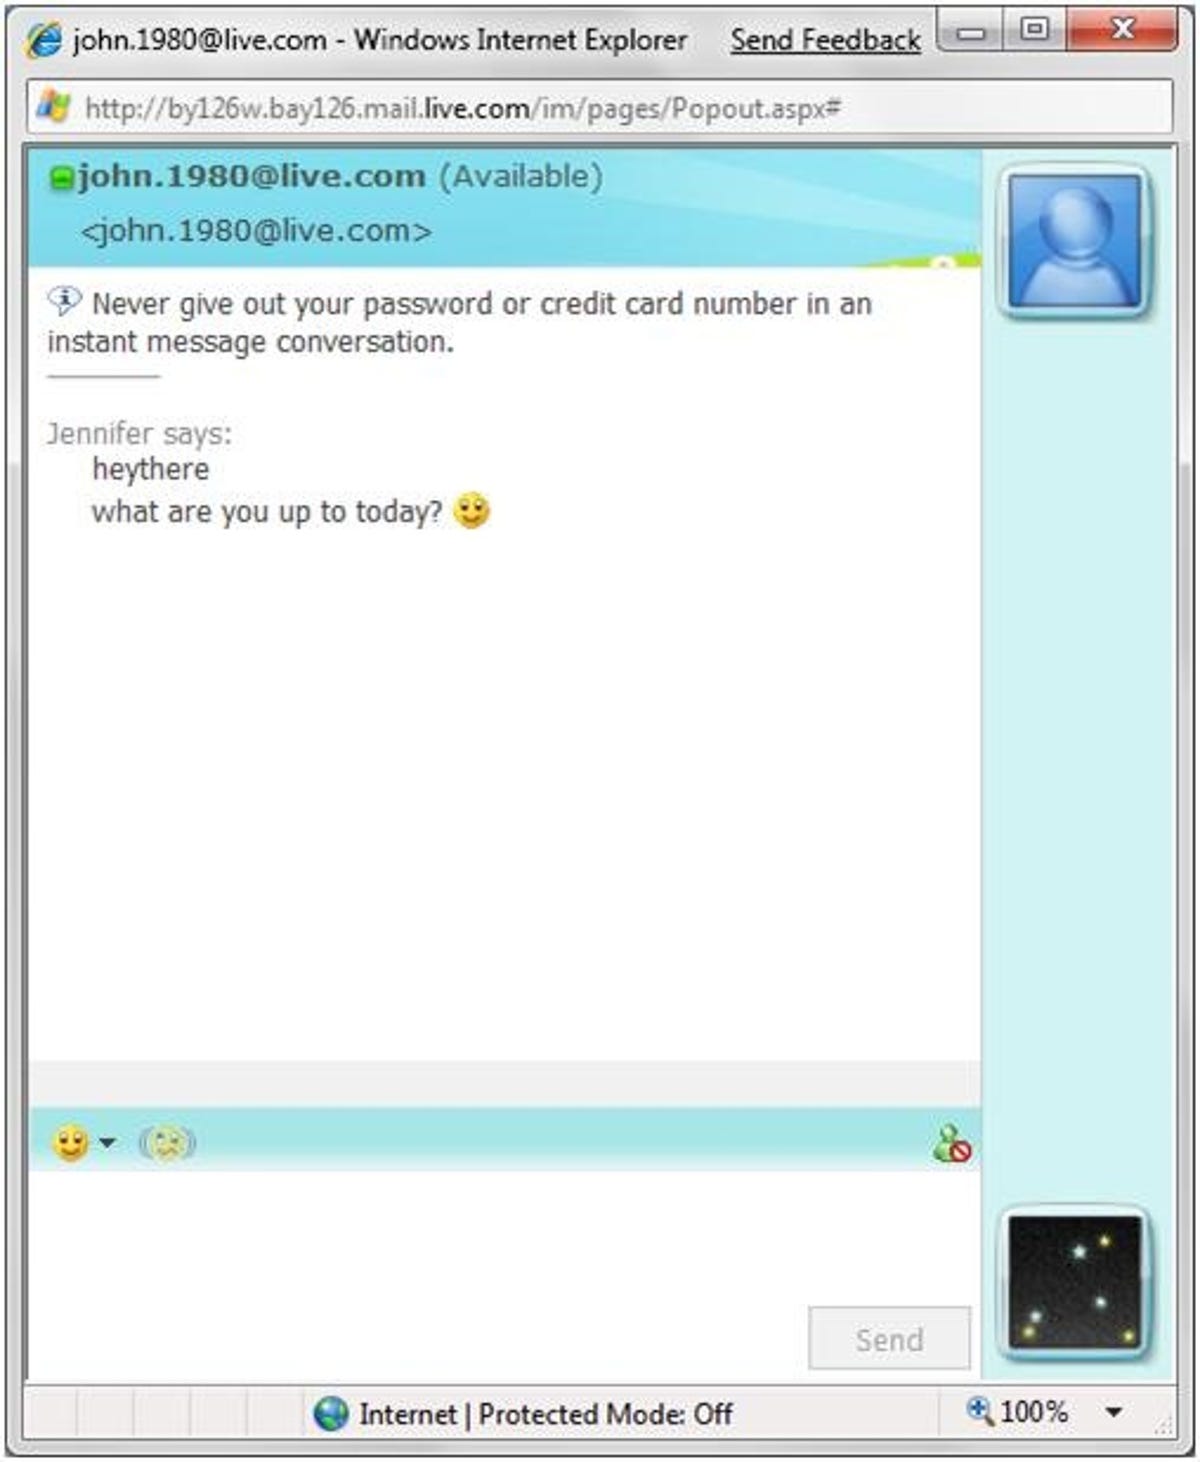 The chat window shows as a separate browser window.